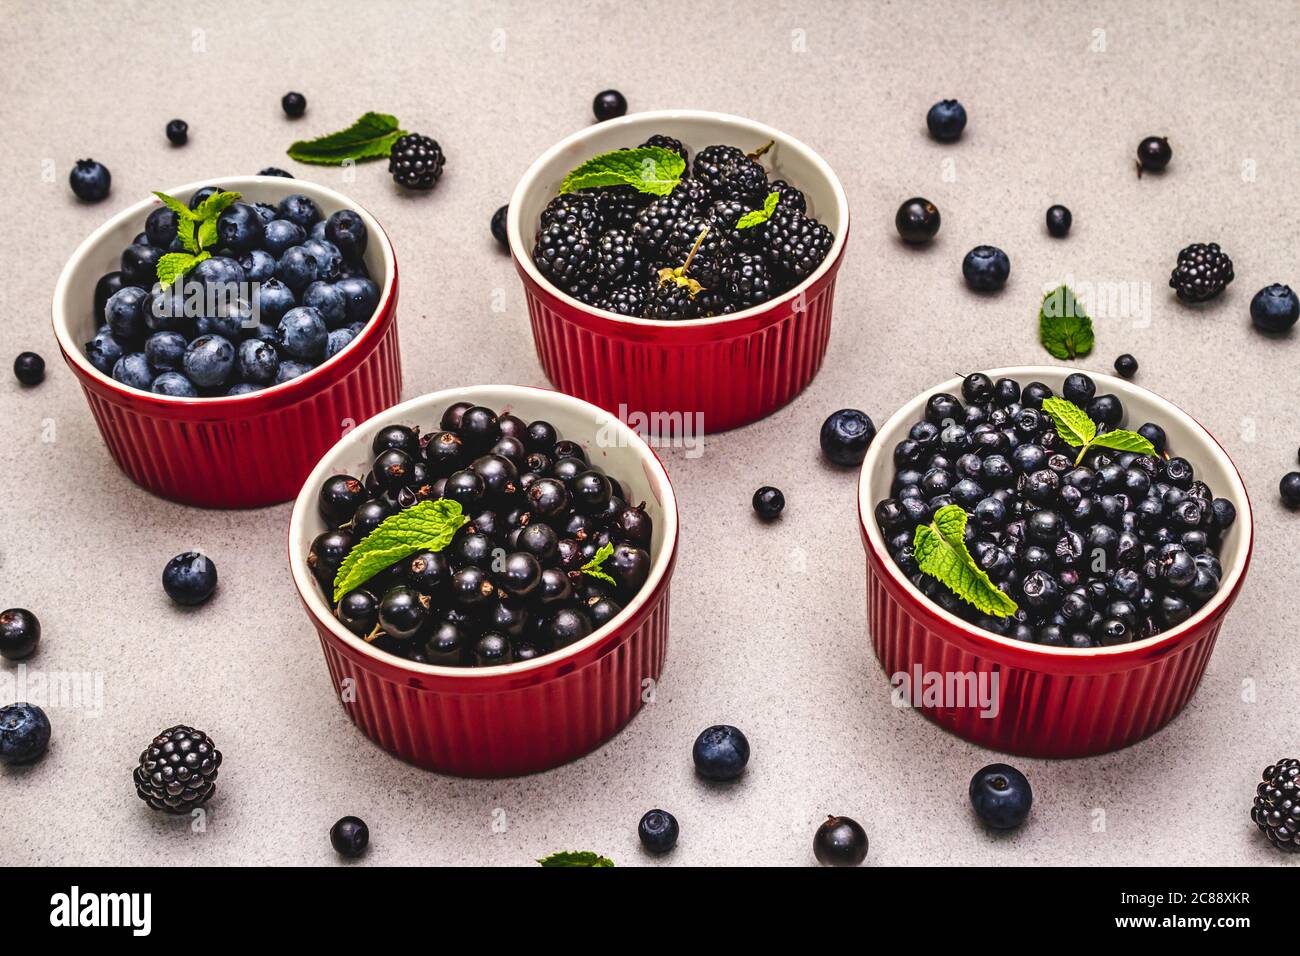 Assorted berries in blue and black colors: bilberry, blueberry, currant and blackberry. Stone concrete background Stock Photo